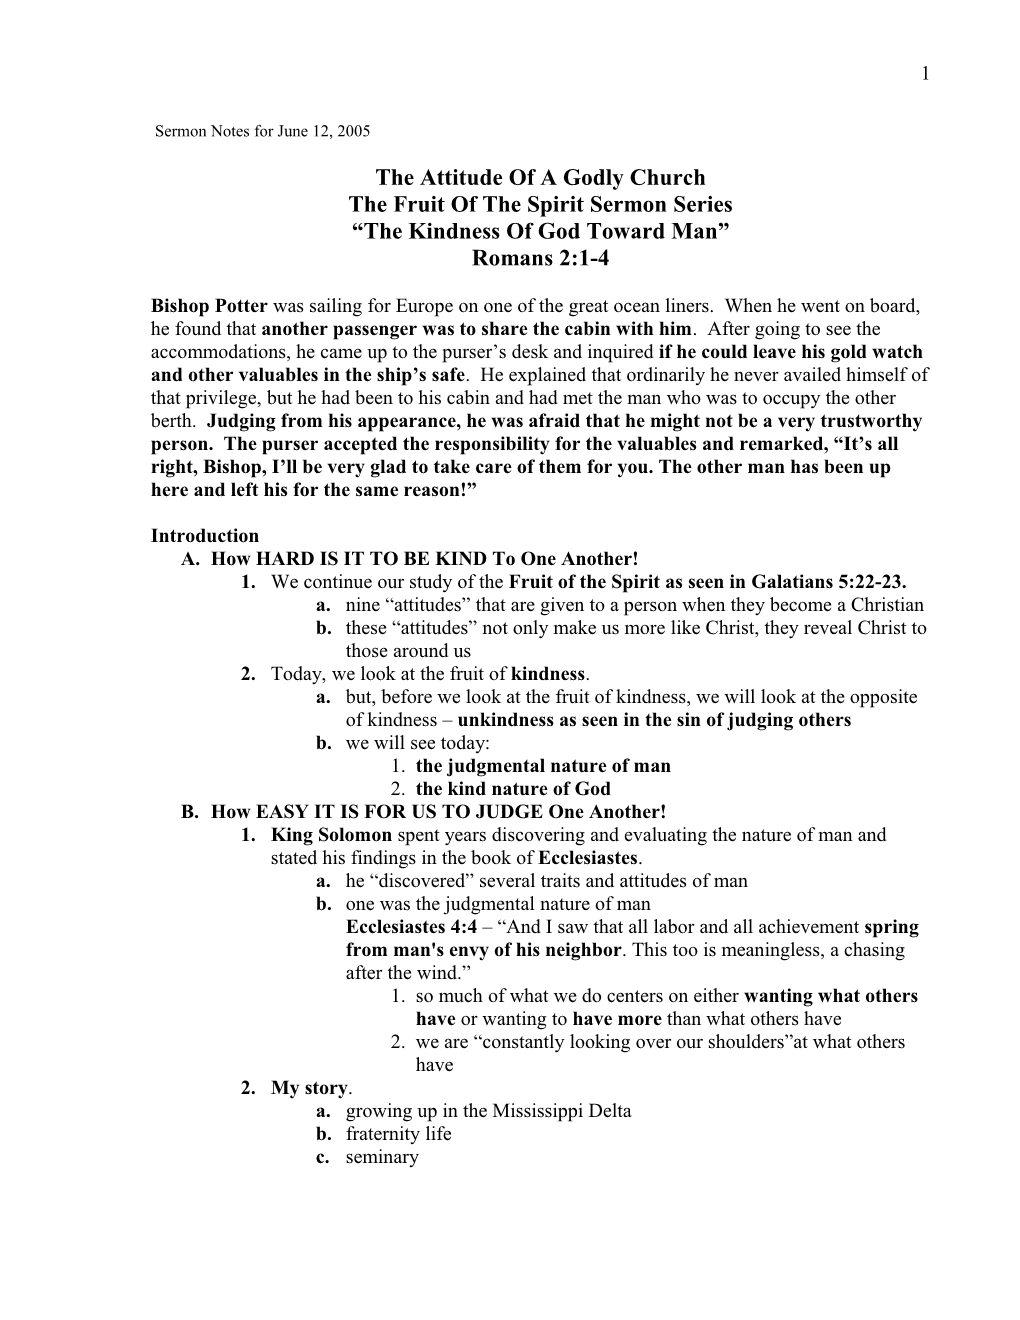 Sermon Notes for June 12, 2005